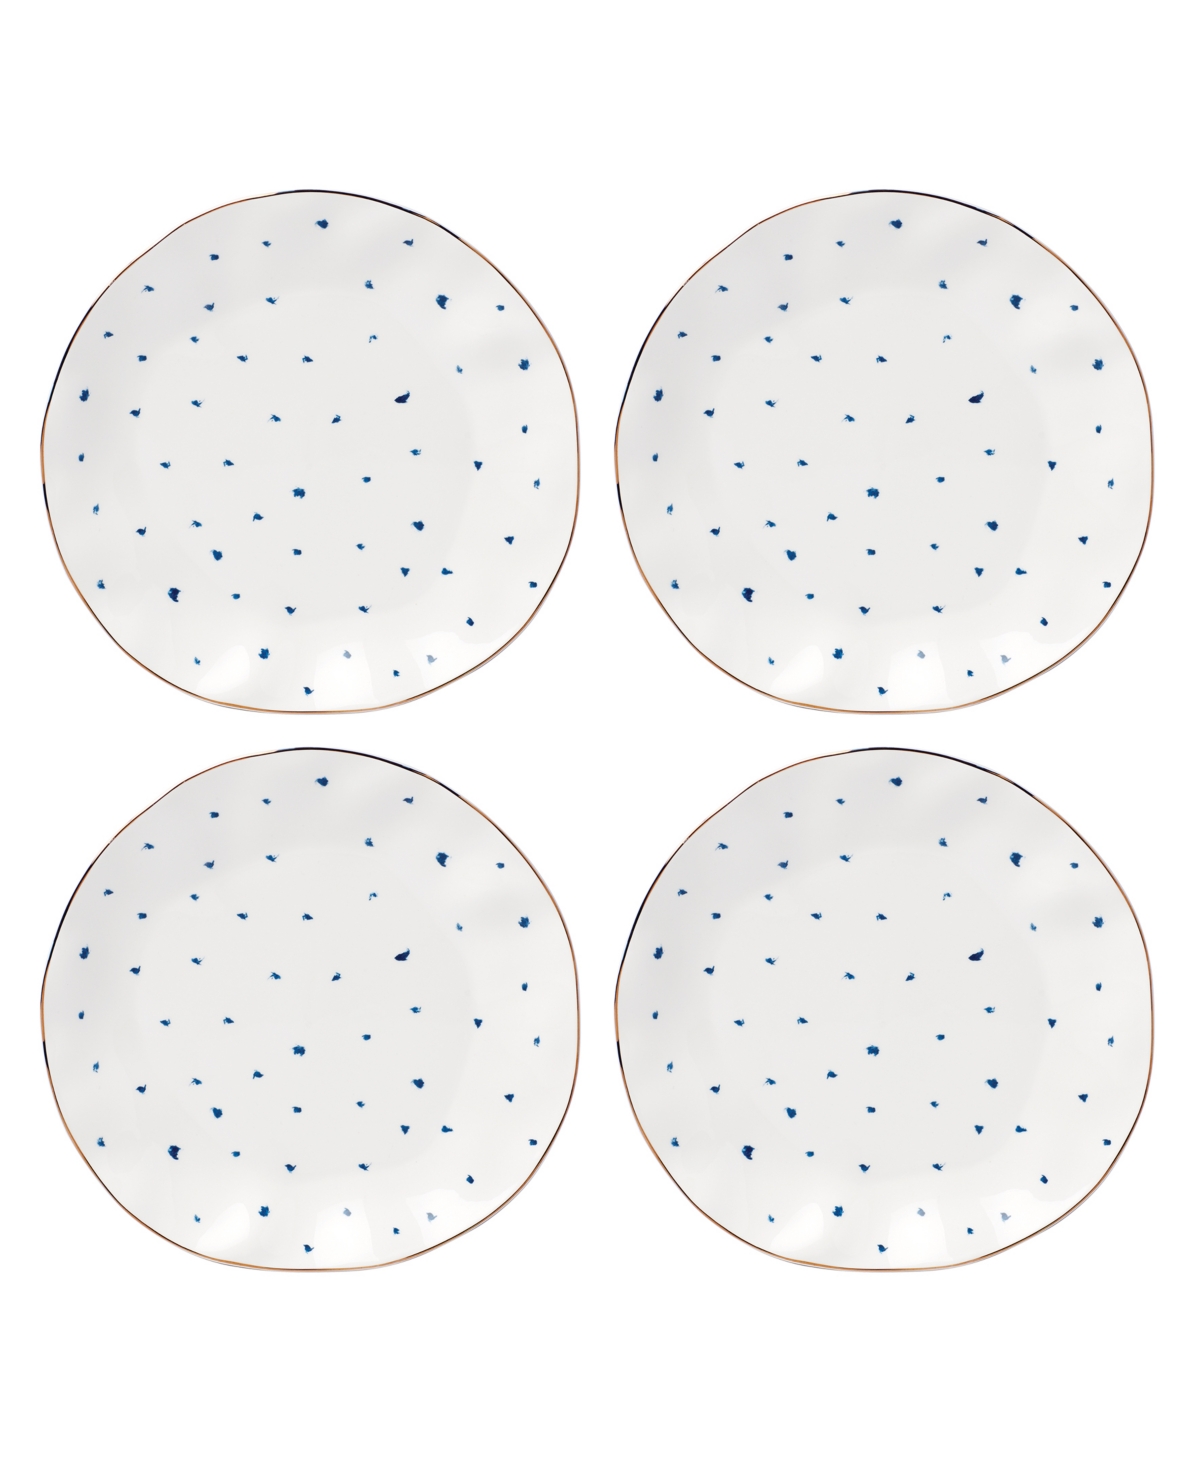 Blue Bay Dots Dinner Plates, Set of 4 - Blue and White